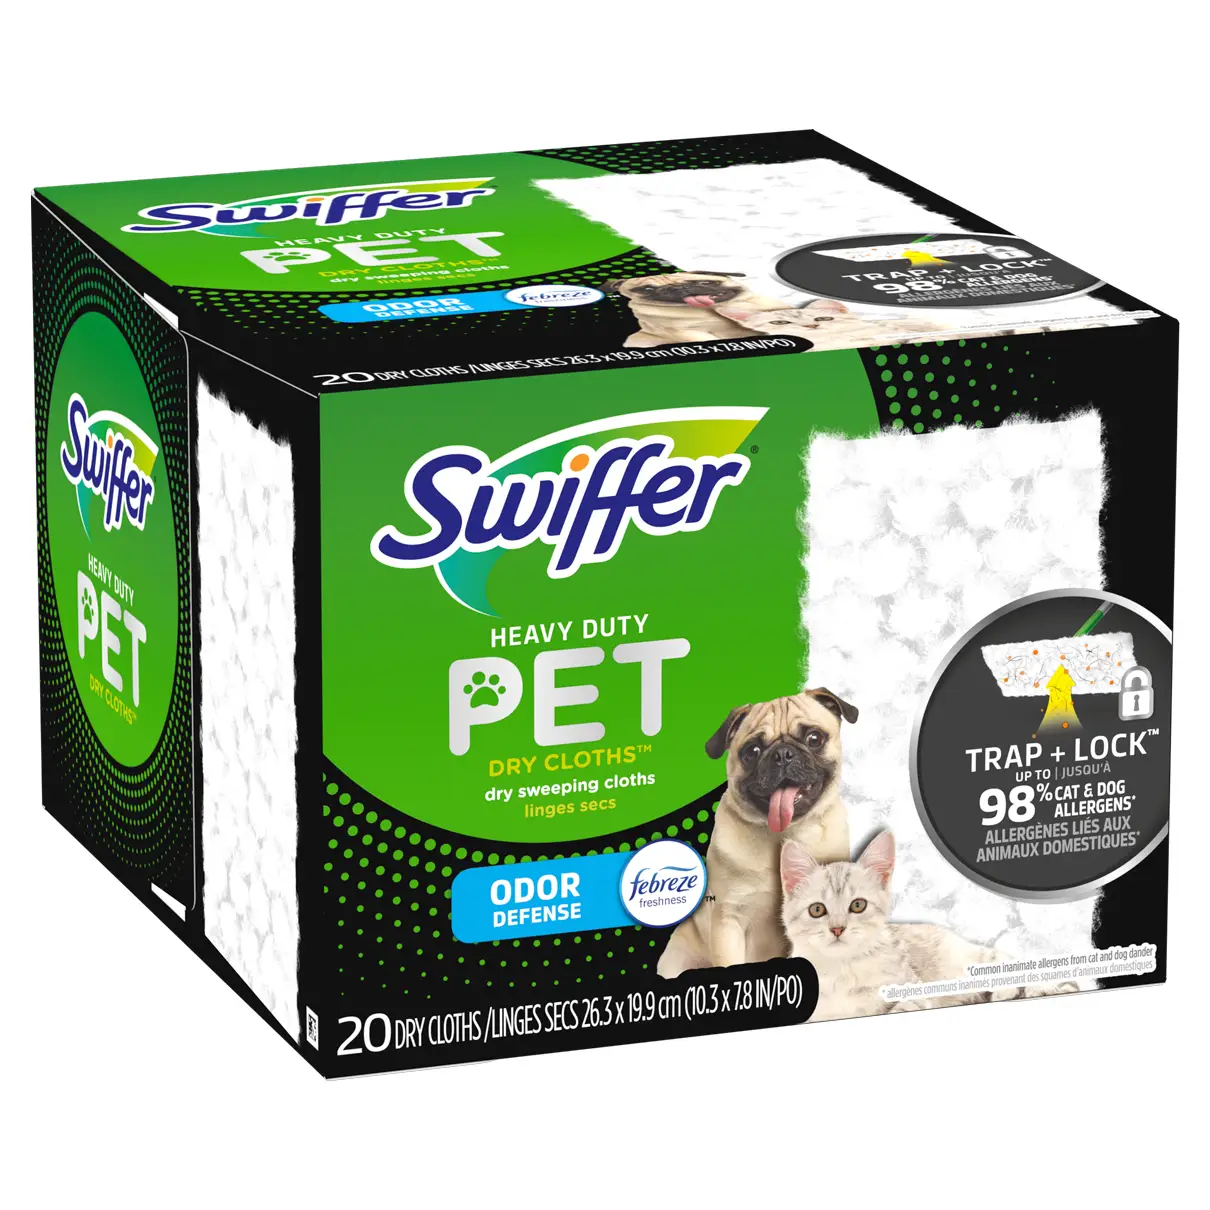 Swiffer® Sweeper™ Pet Heavy Duty Multi-Surface Dry Cloth Refills for Floor Sweeping and Cleaning